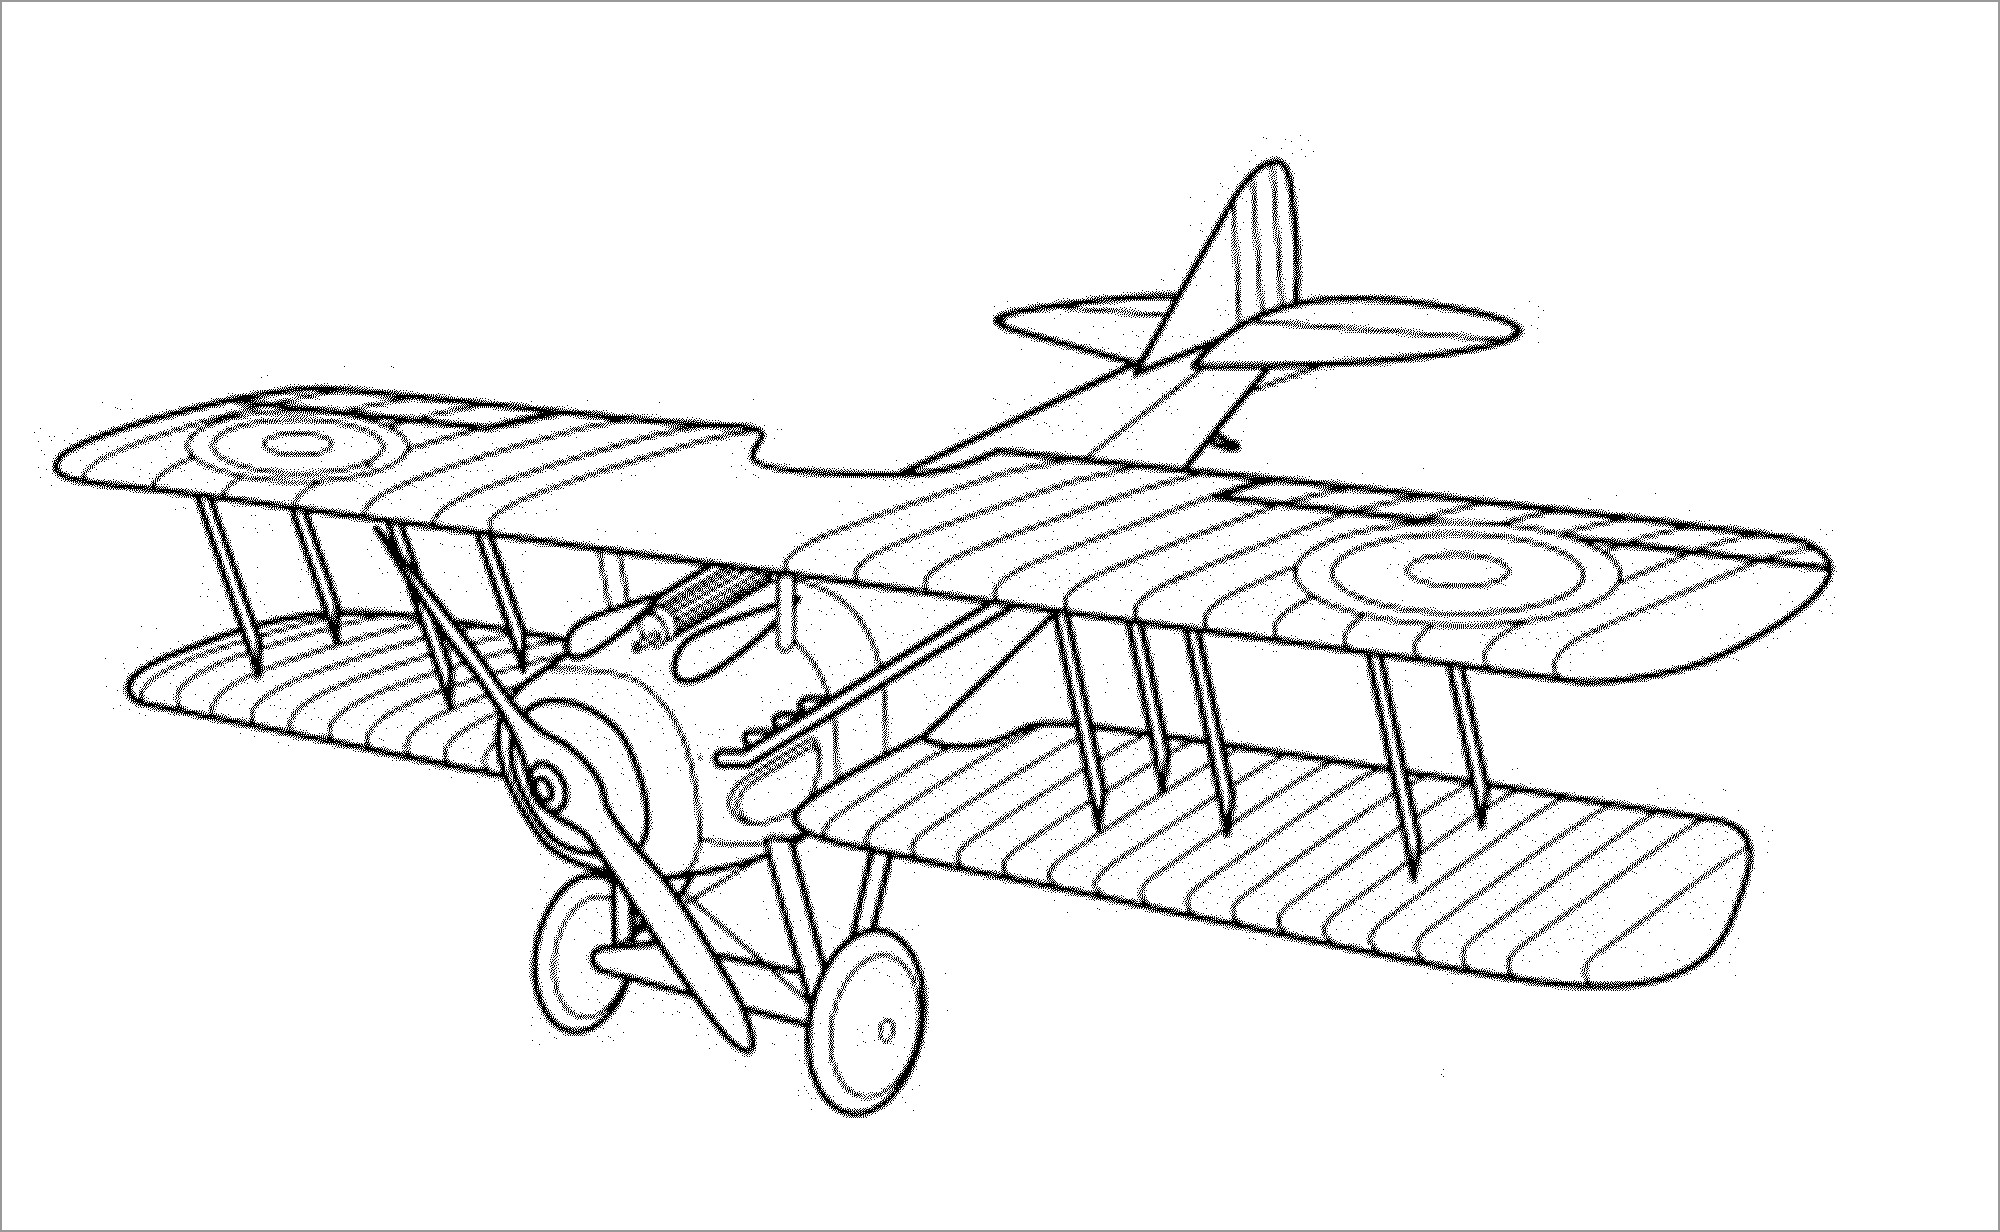 free airplane coloring pages